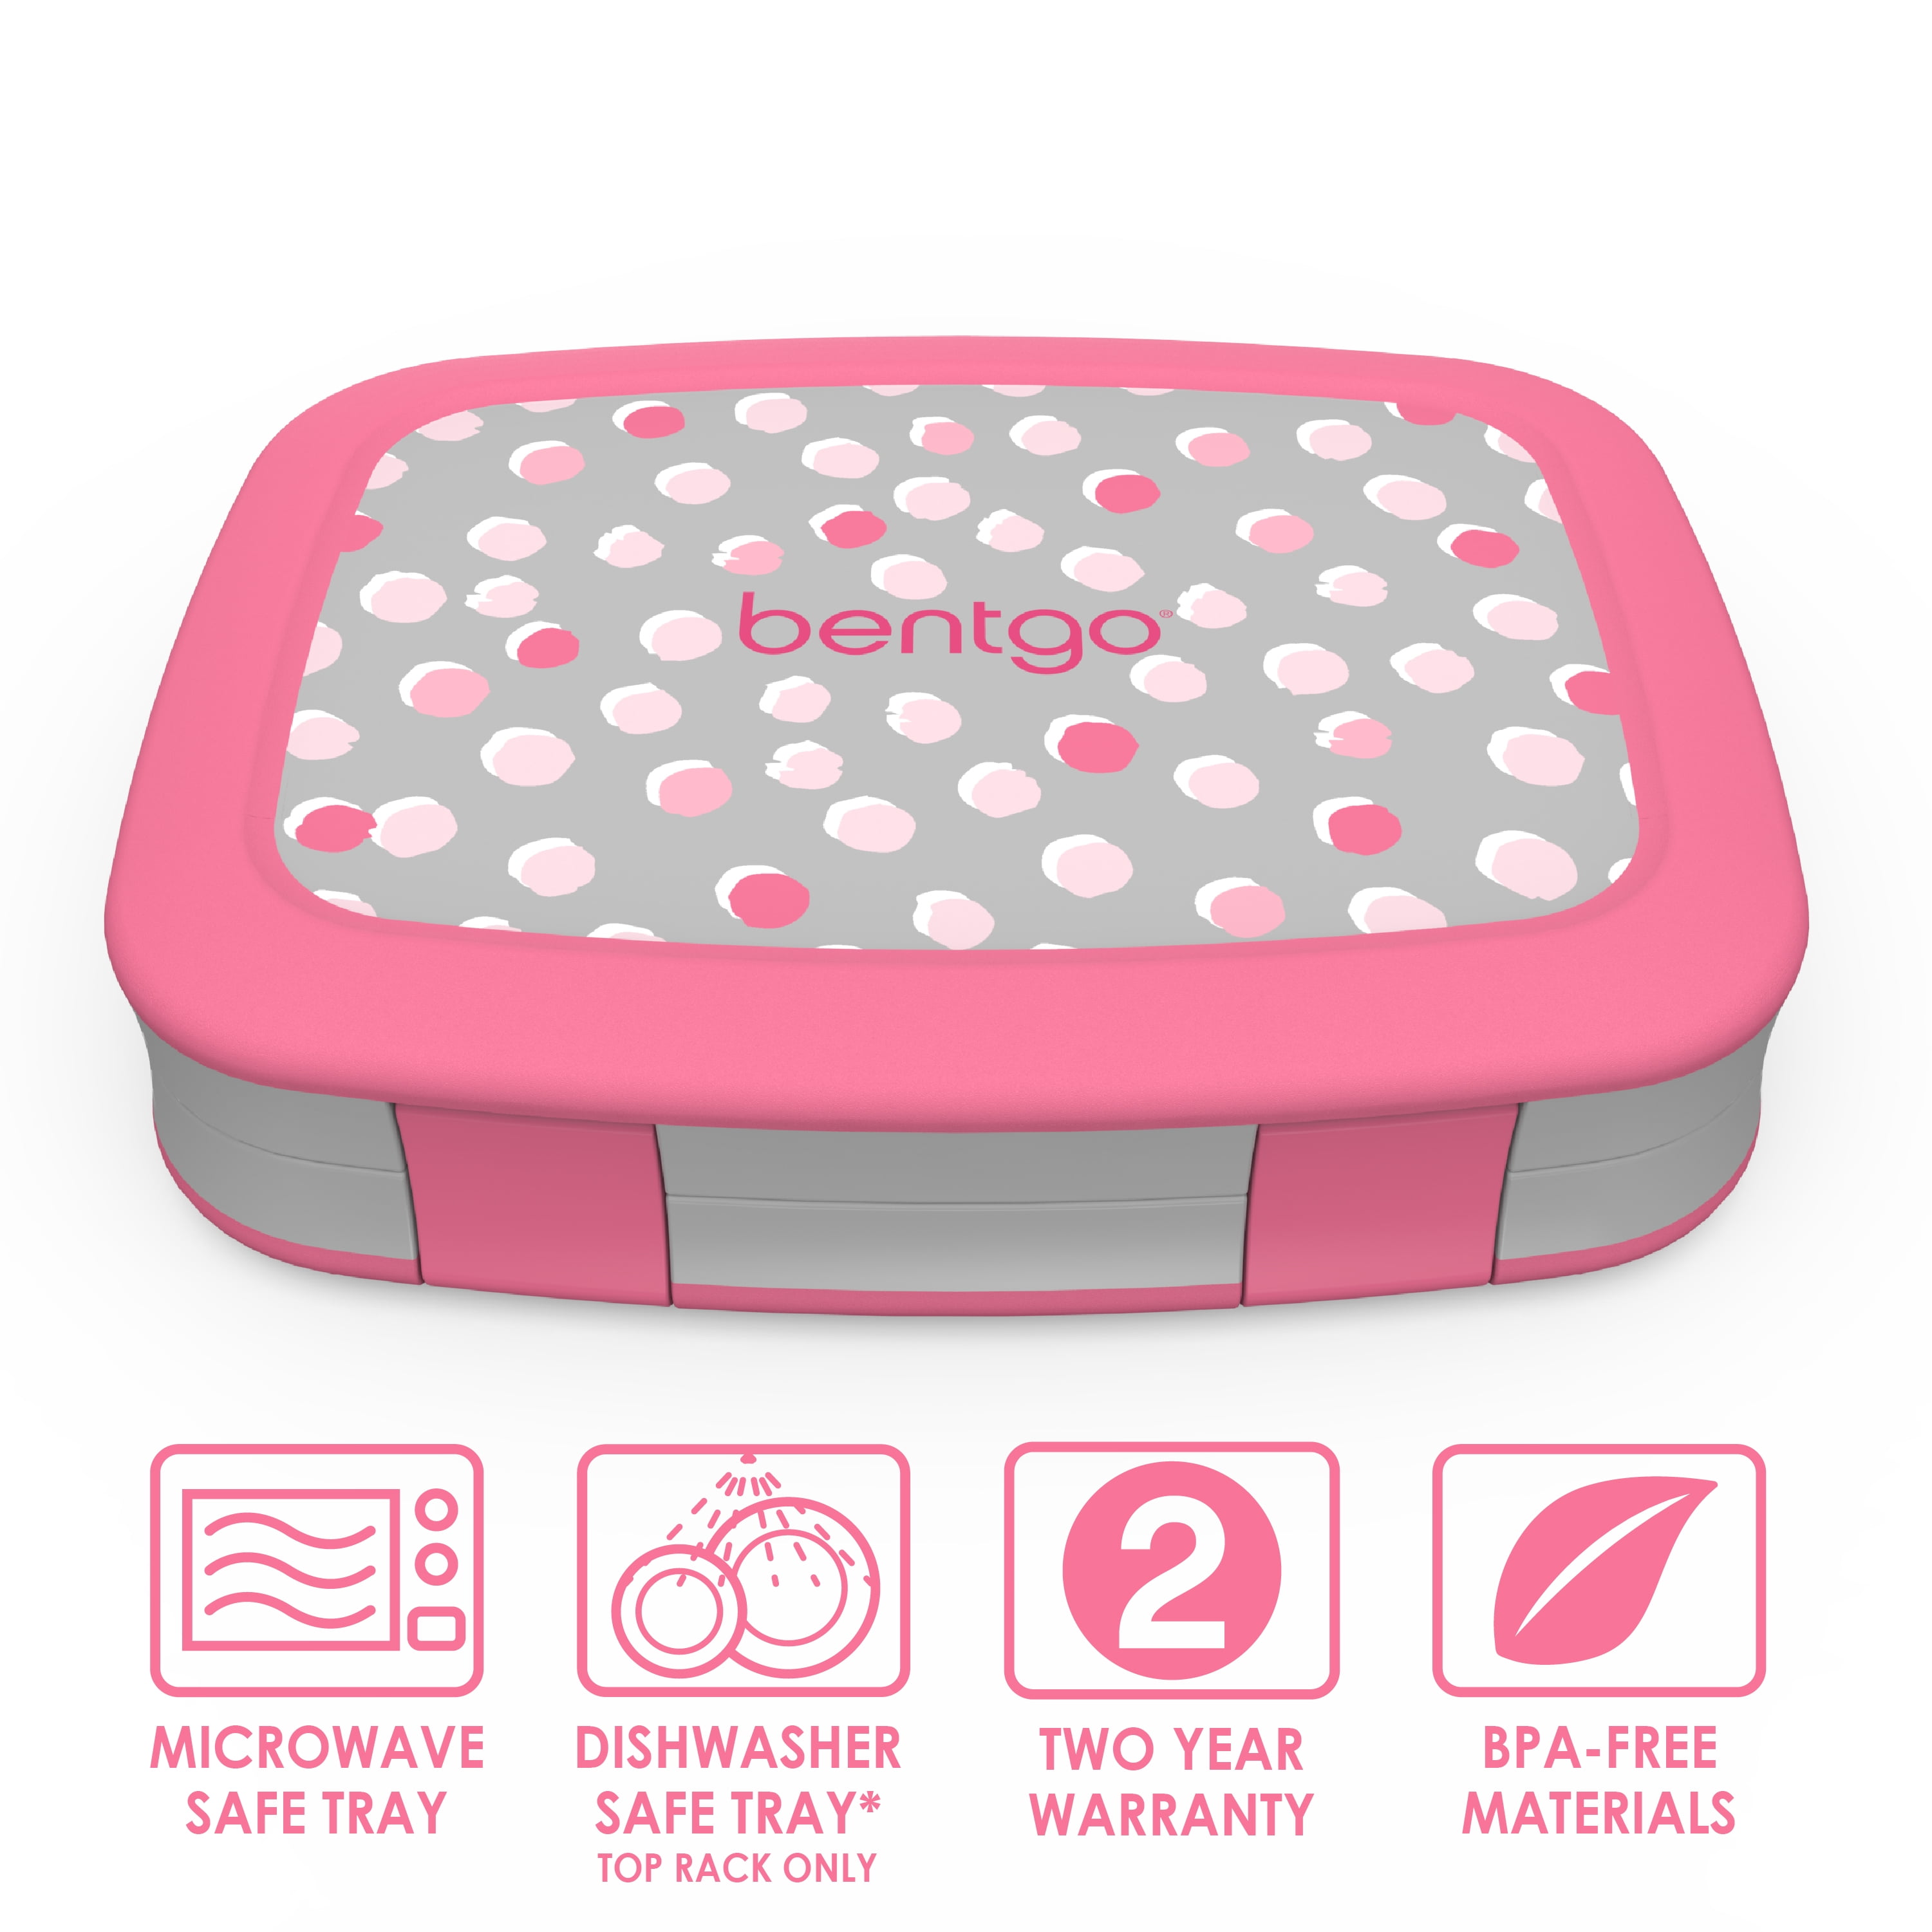  Bentgo® Kids Prints Leak-Proof, 5-Compartment Bento-Style Kids  Lunch Box - Ideal Portion Sizes for Ages 3 to 7 - BPA-Free, Dishwasher  Safe, Food-Safe Materials (Safari) : Home & Kitchen